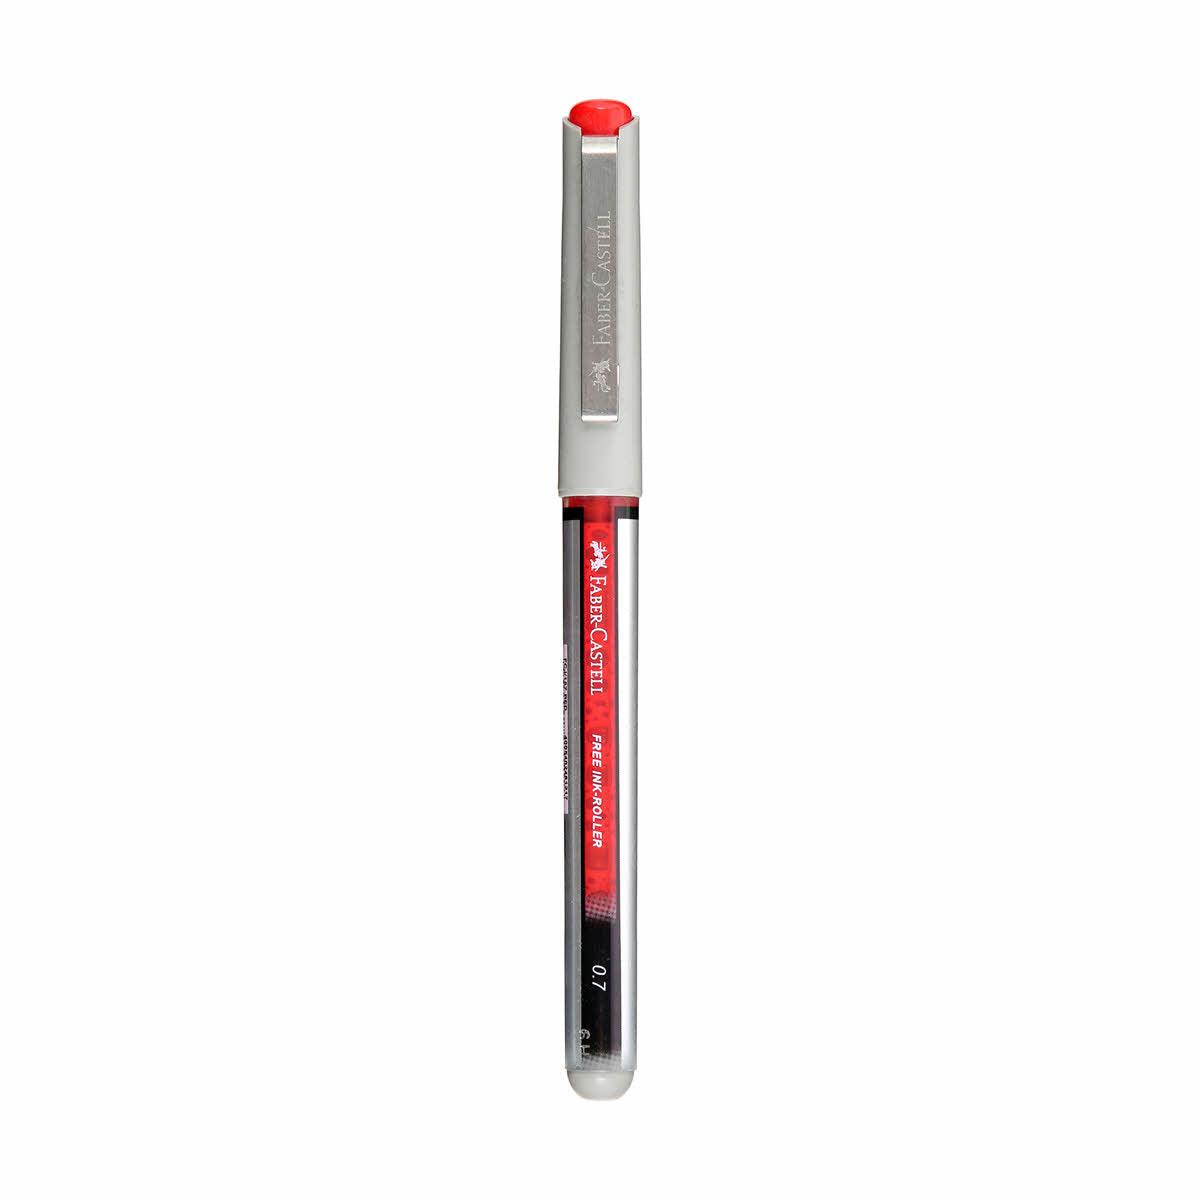 Faber Castell Free Ink Roller 157 0.7mm / Red - Karout Online -Karout Online Shopping In lebanon - Karout Express Delivery 